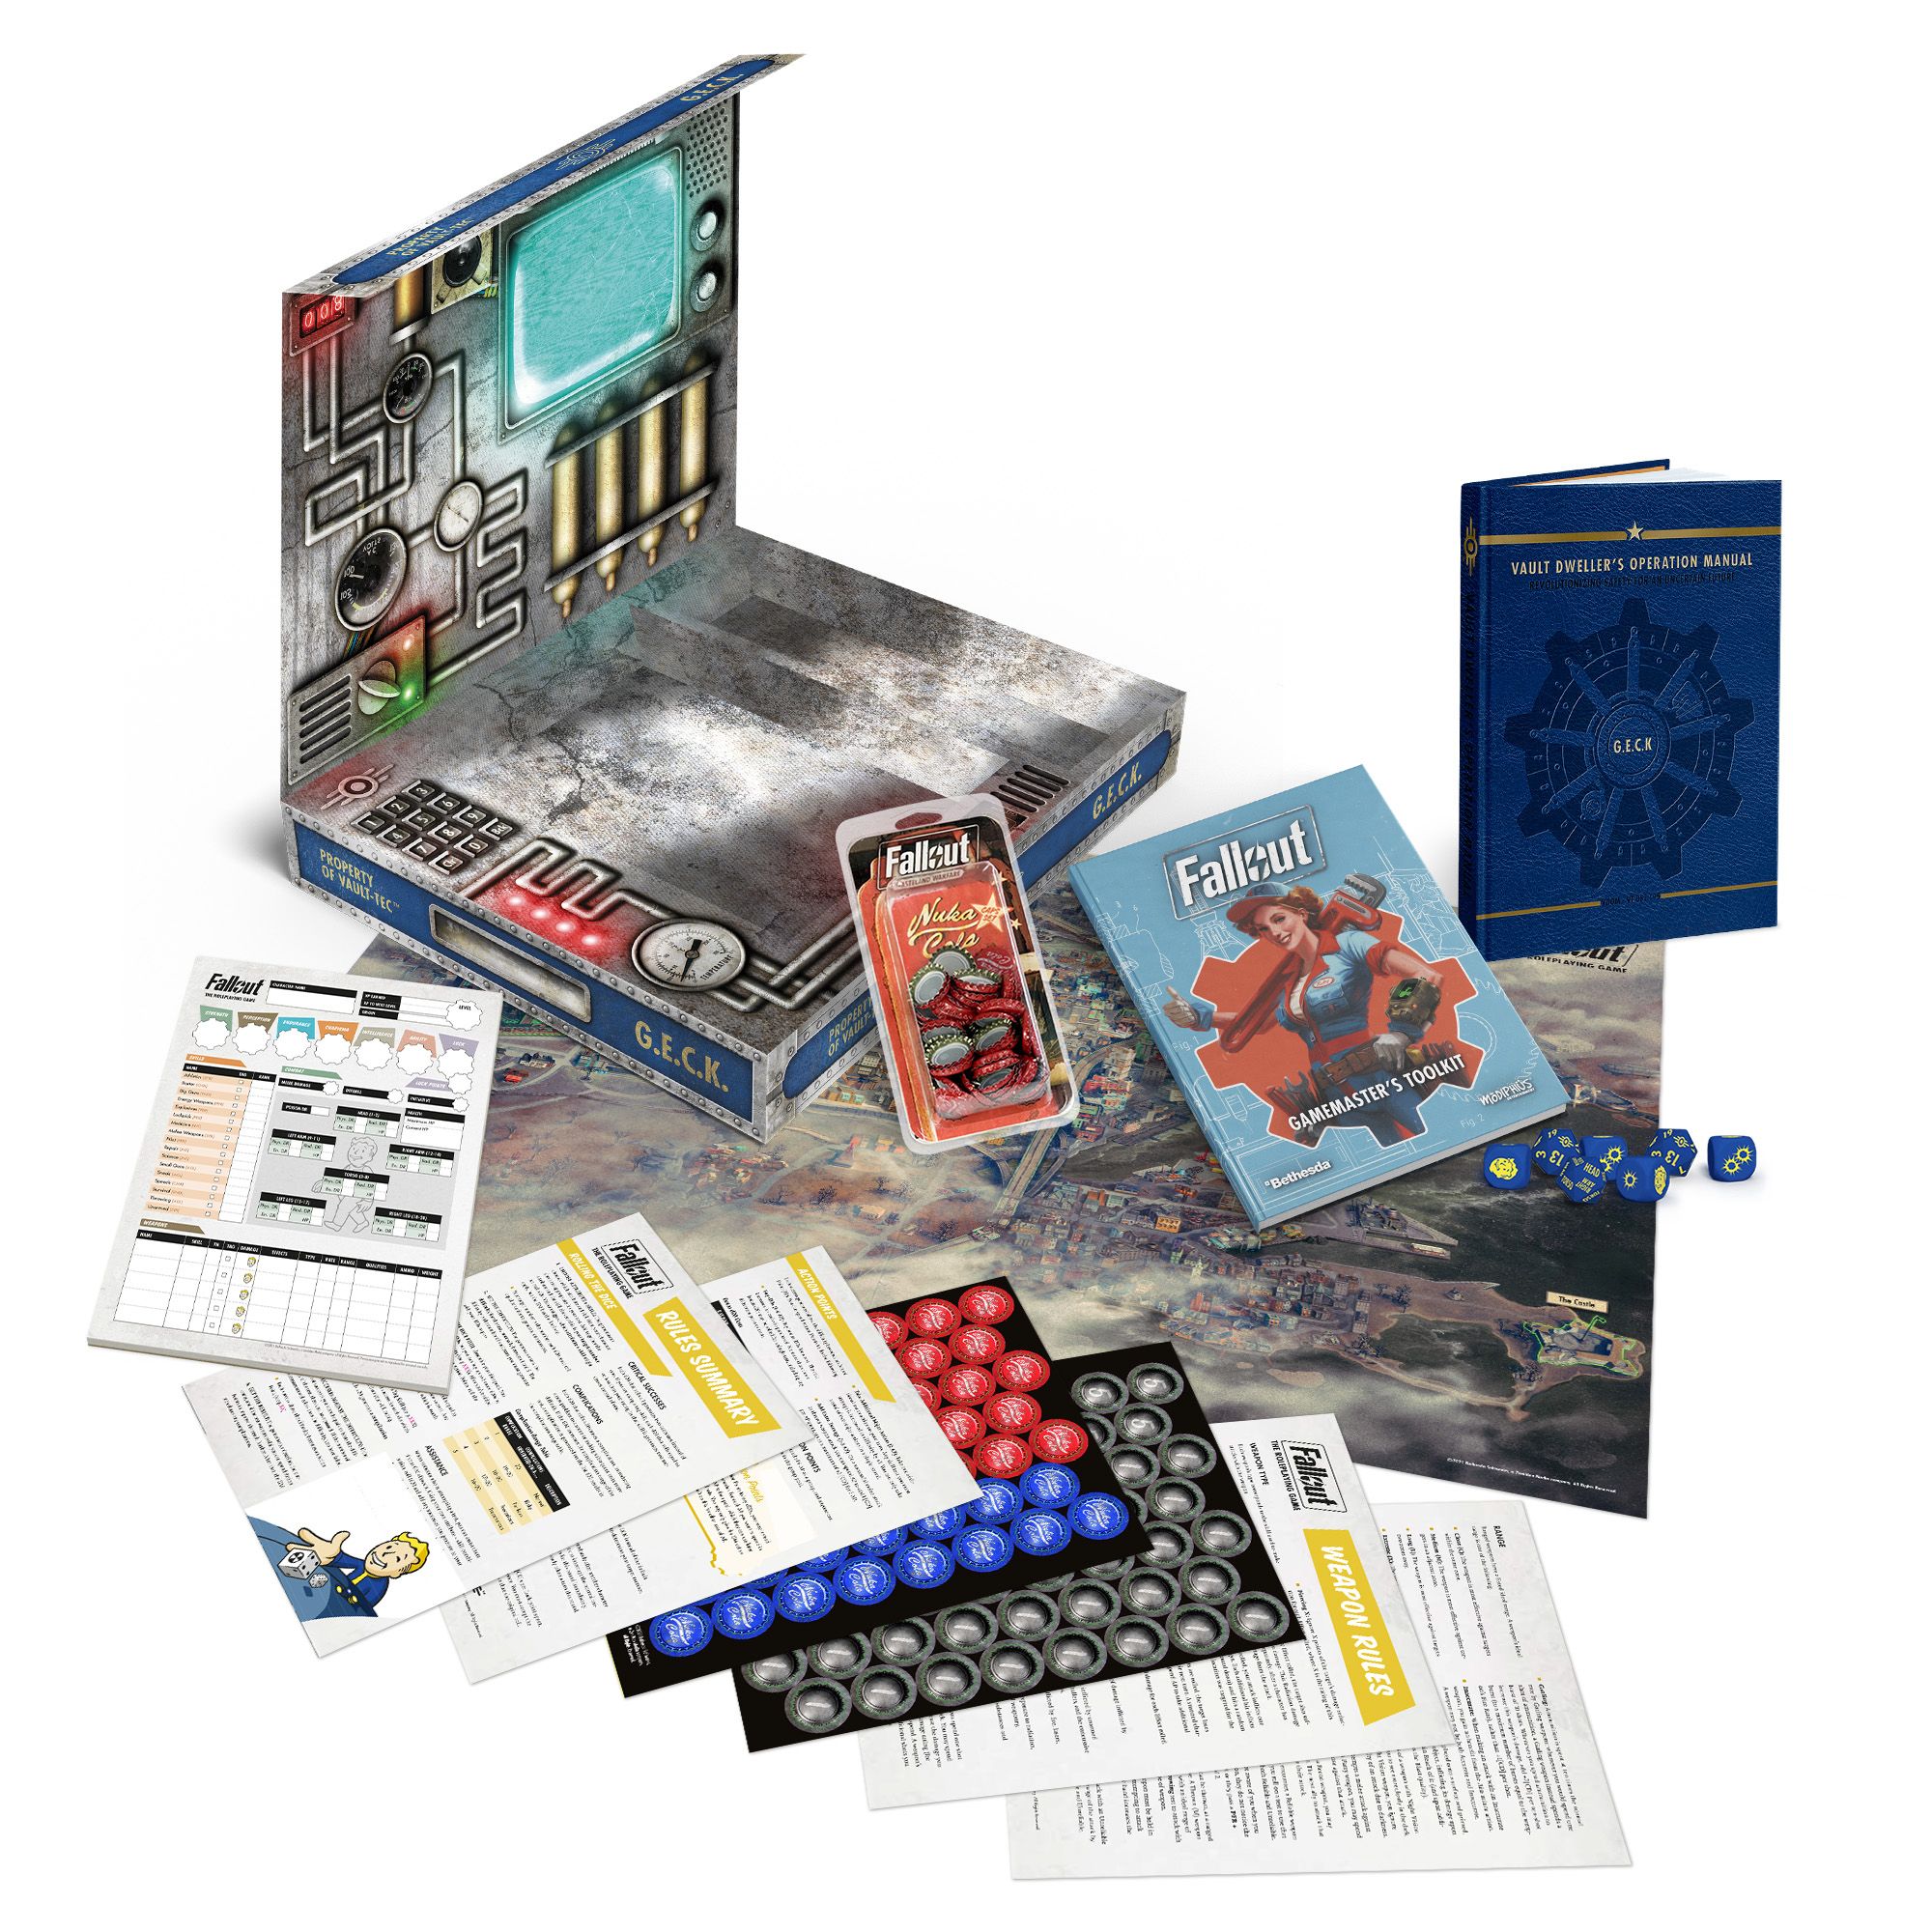 An image showing the Fallout: The Roleplaying game.